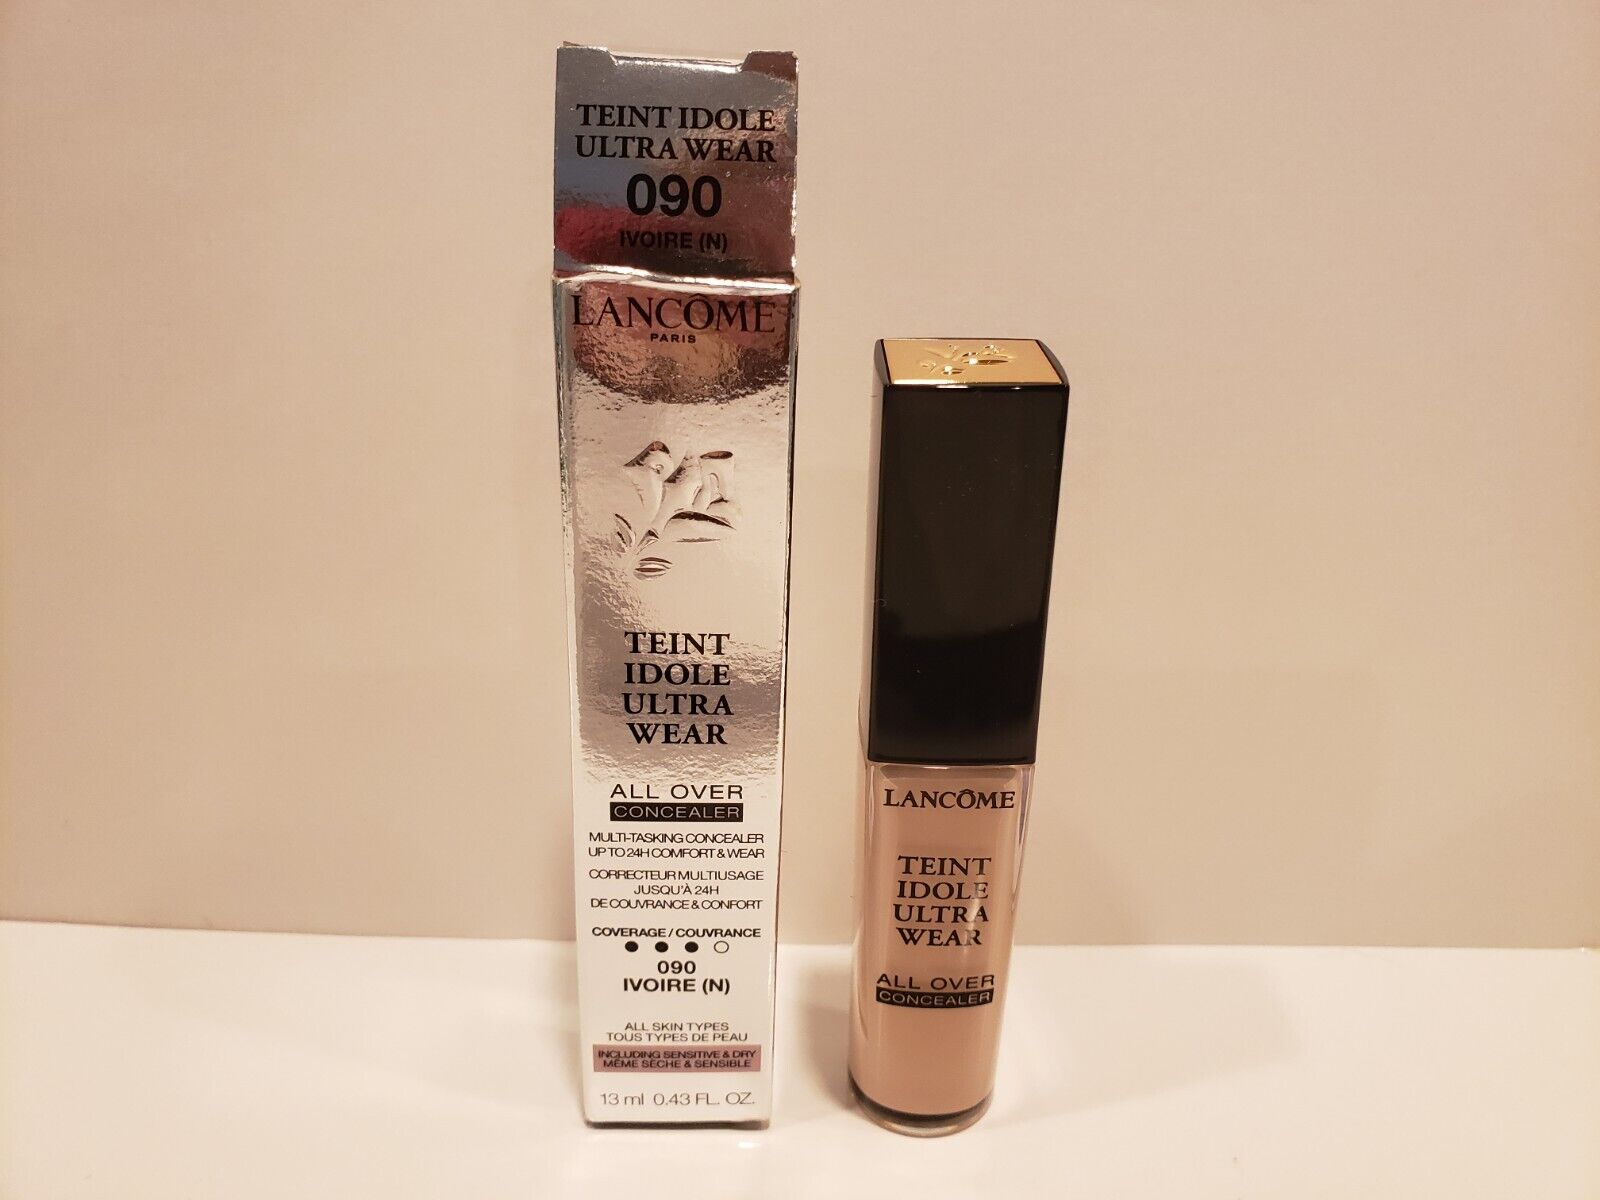 Lancome - Teint Idole Ultra Wear - All Over Concealer - 090 Ivoire